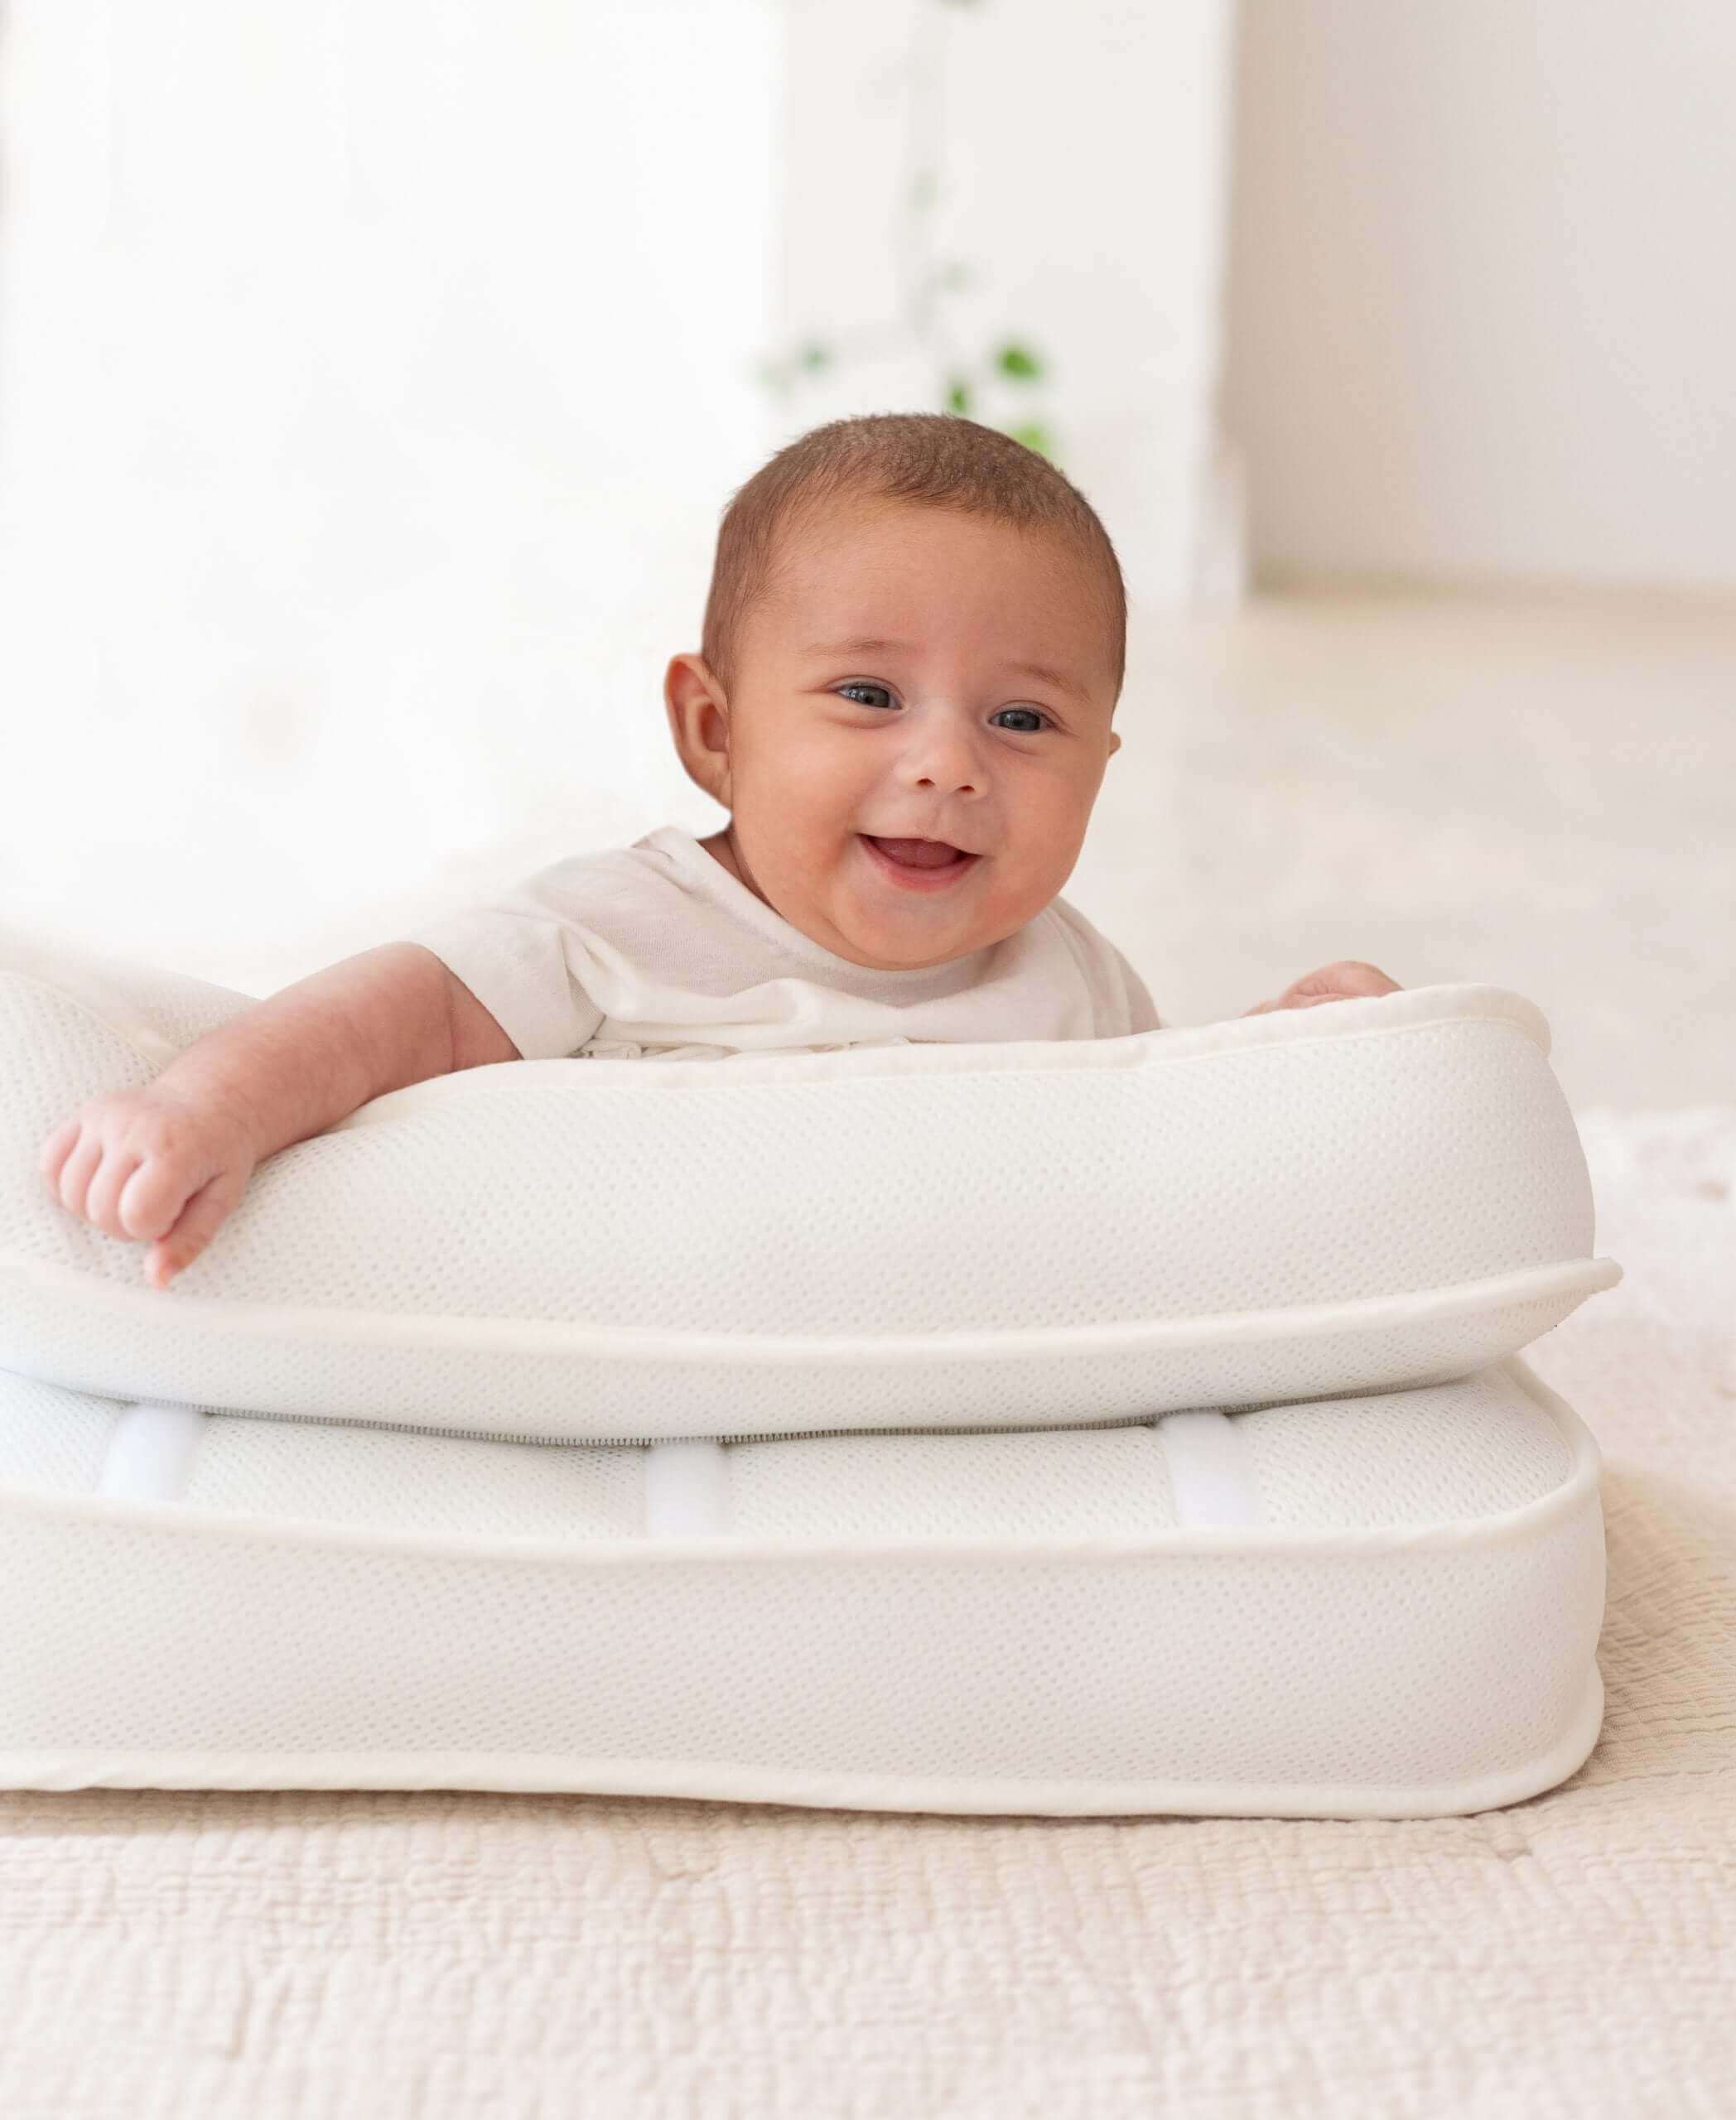 White Cloud Cushion Baby and Playroom Decor Cloud Pillow for